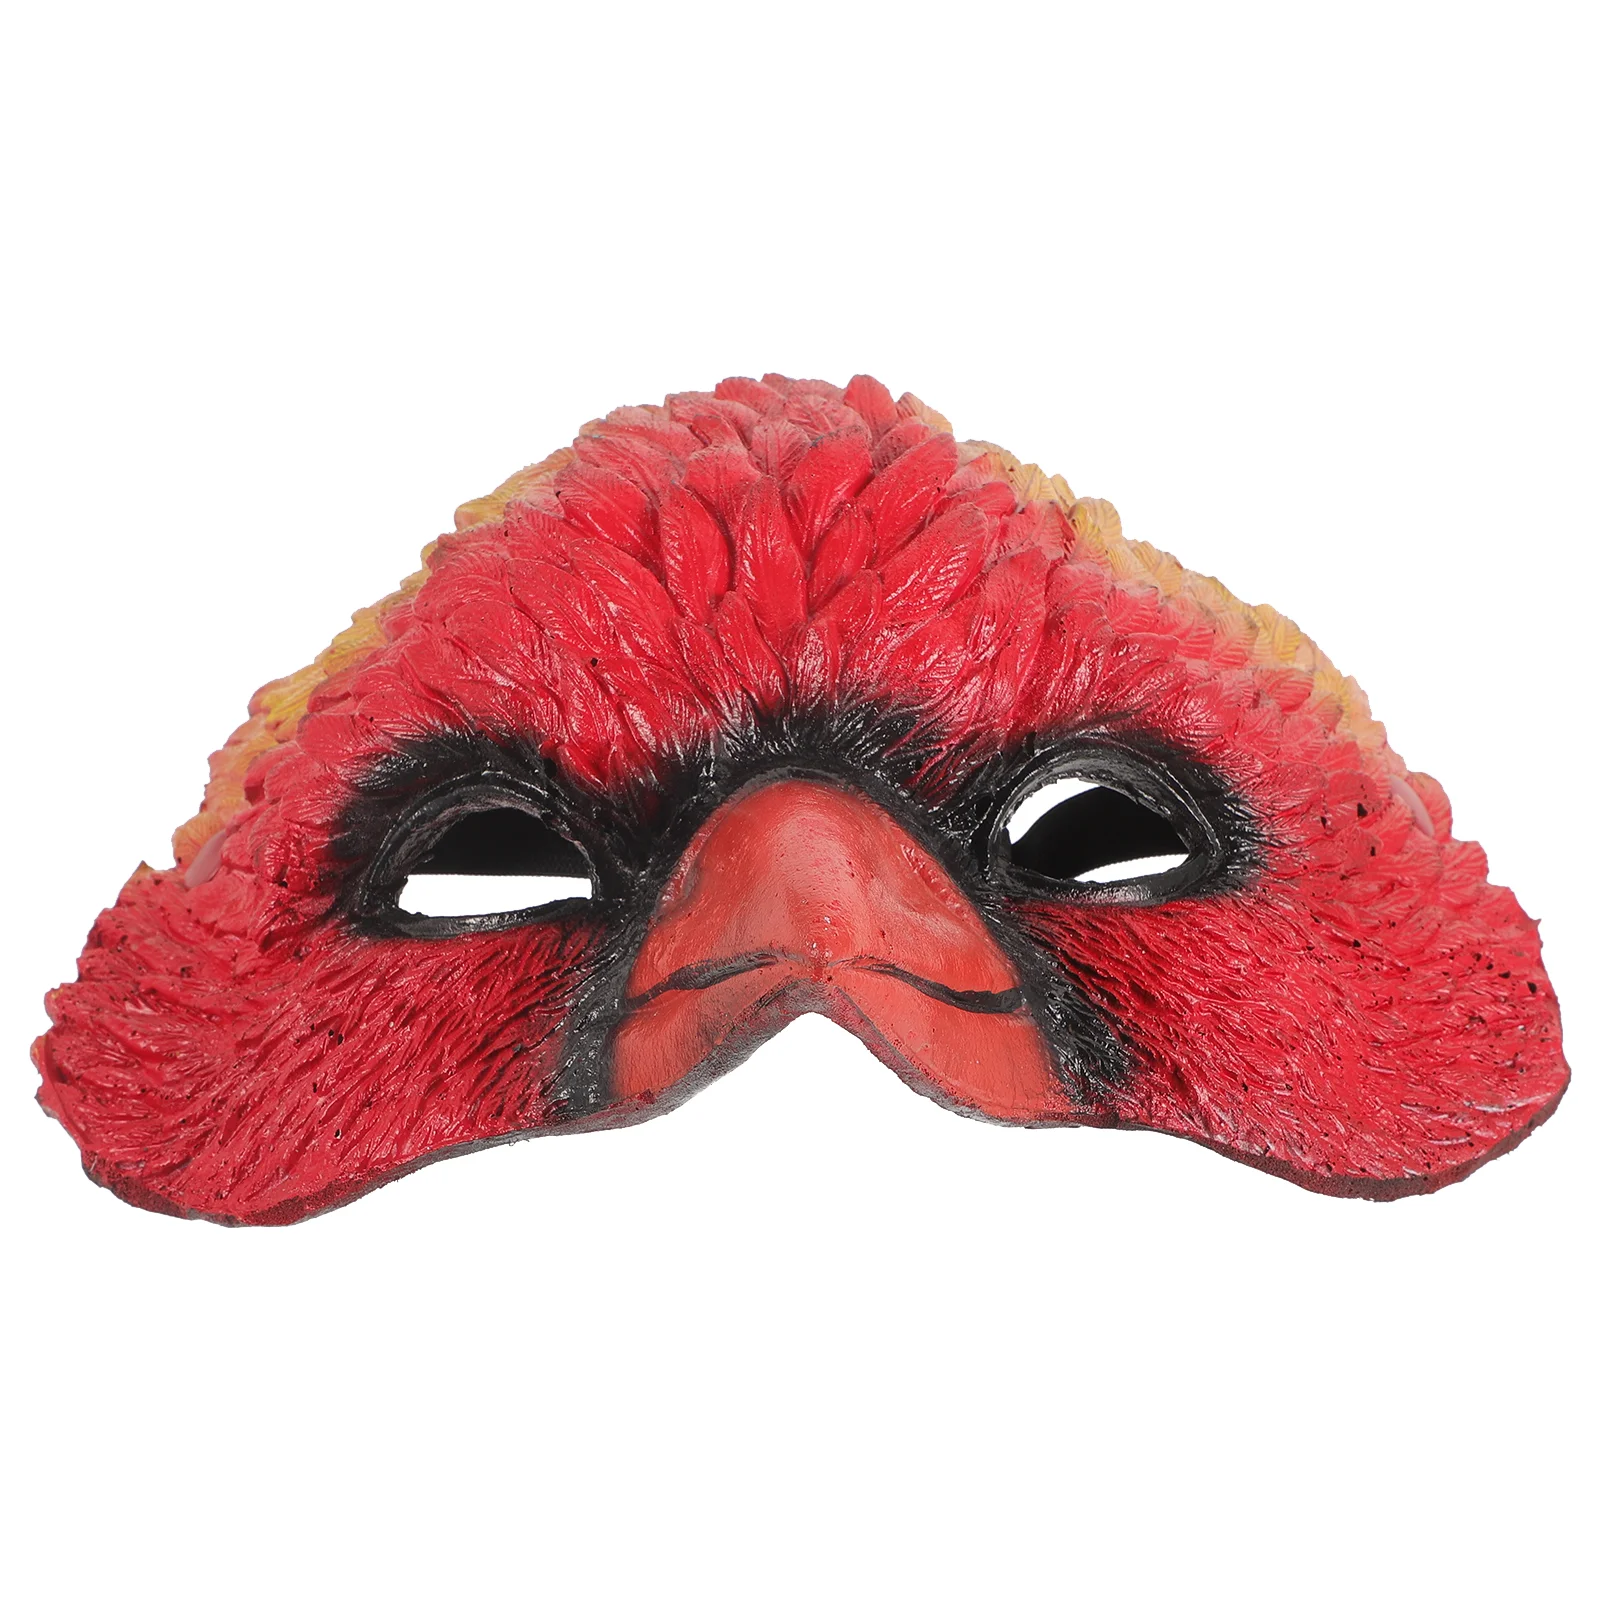 Bird Head Mask Role Play Outfits Make up Face Animal Masks for Party Pu Foam Cosplay Costume superhero cosplay blue bodysuit superwomen zentai costumes womloak supergirl cos jumpsuit rompers aldult outfits role play